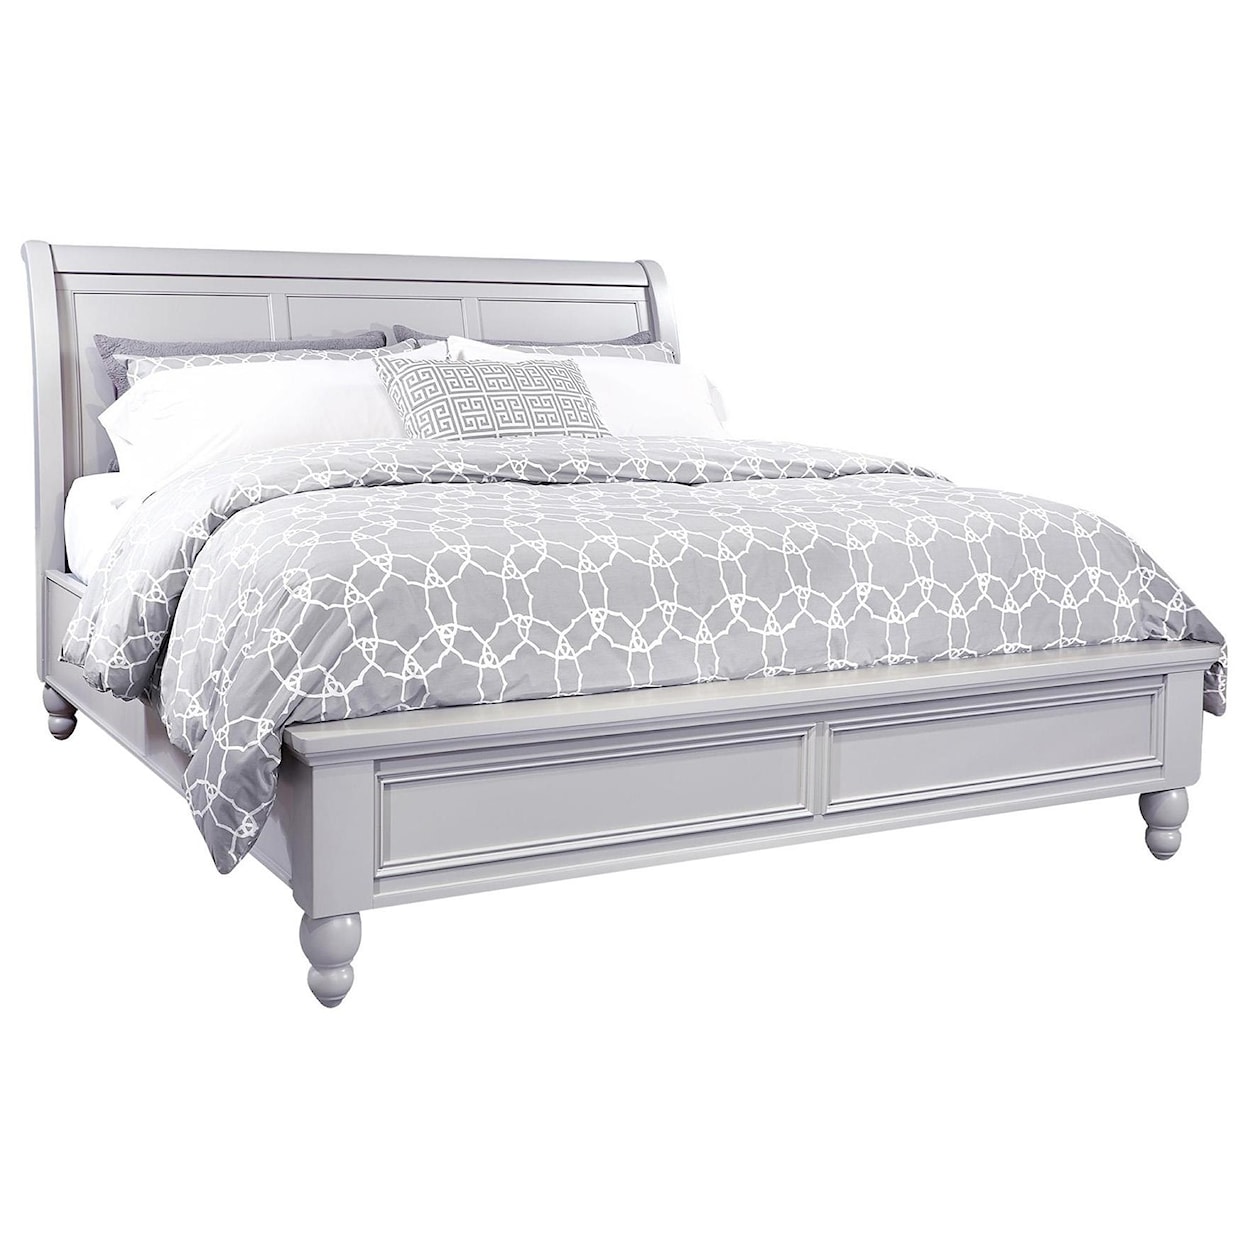 Aspenhome Cambridge CHY King Sleigh Bed